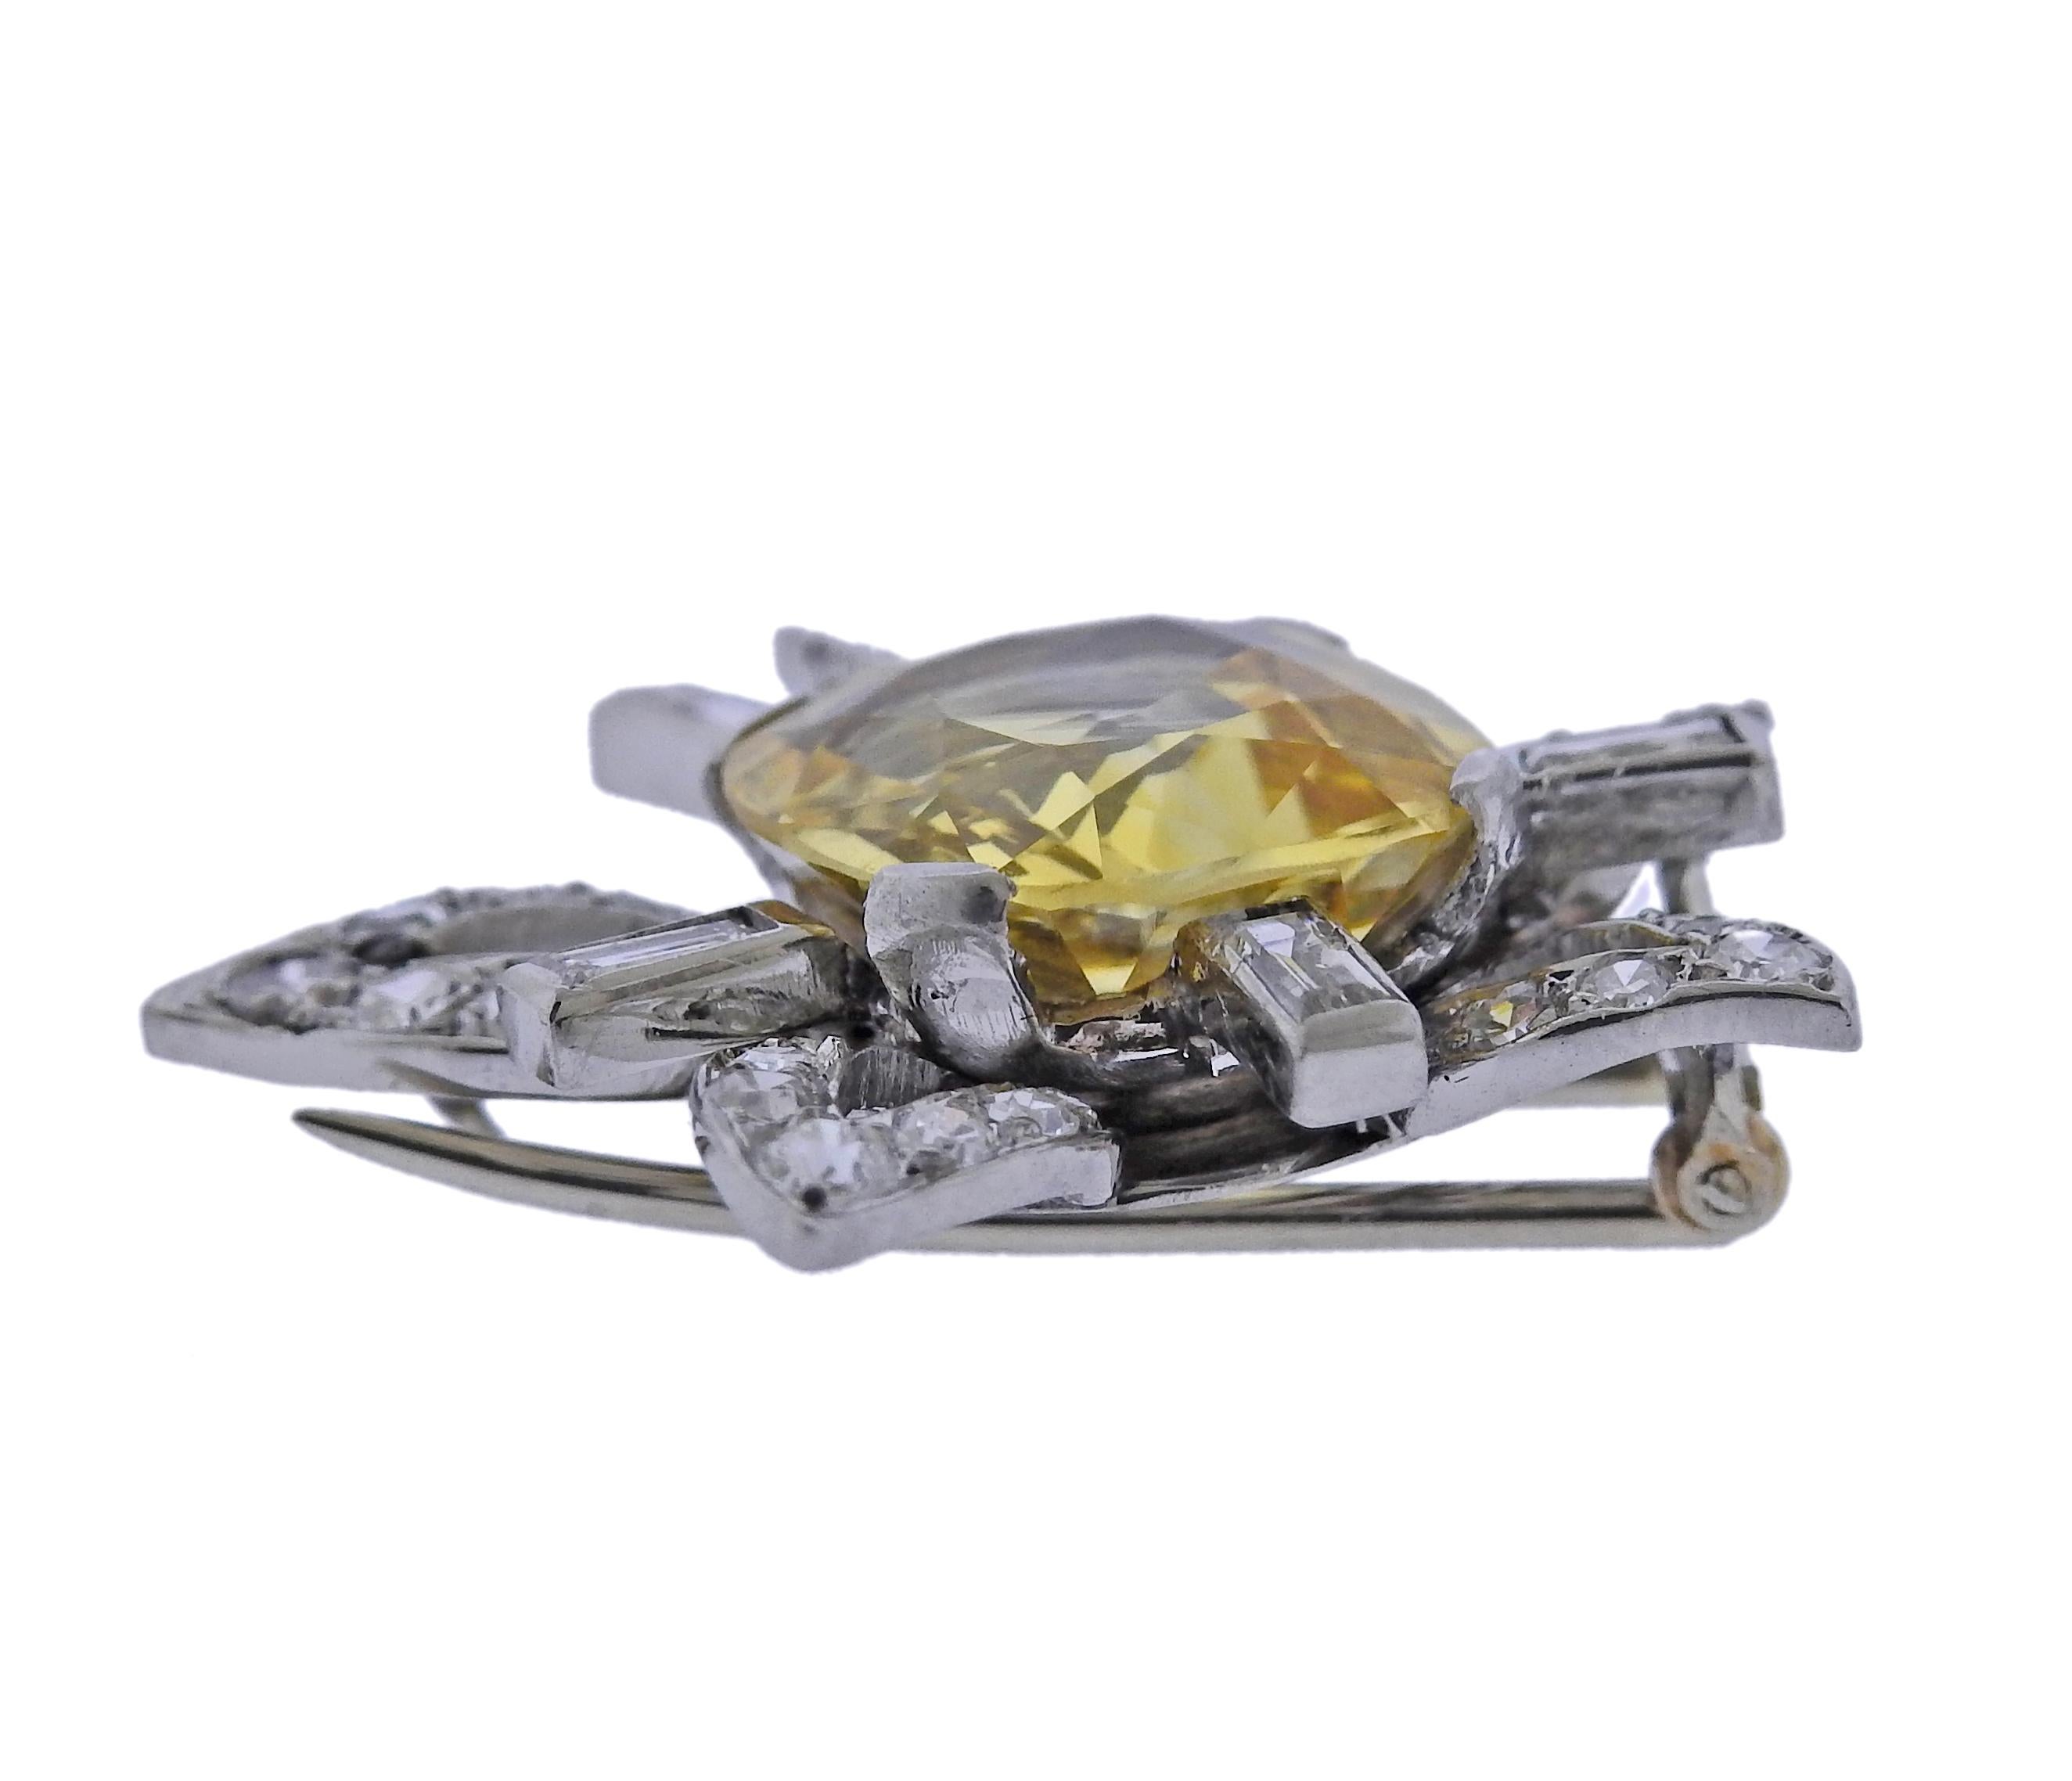 Platinum brooch, set with center approx. 8.24ct yellow sapphire (measures 12.7 x 11.89 x 6.2mm), surrounded with approx. 0.74ctw in diamonds. Brooch measures 28mm x 27mm. Tested plat. Weight - 10.3 grams.